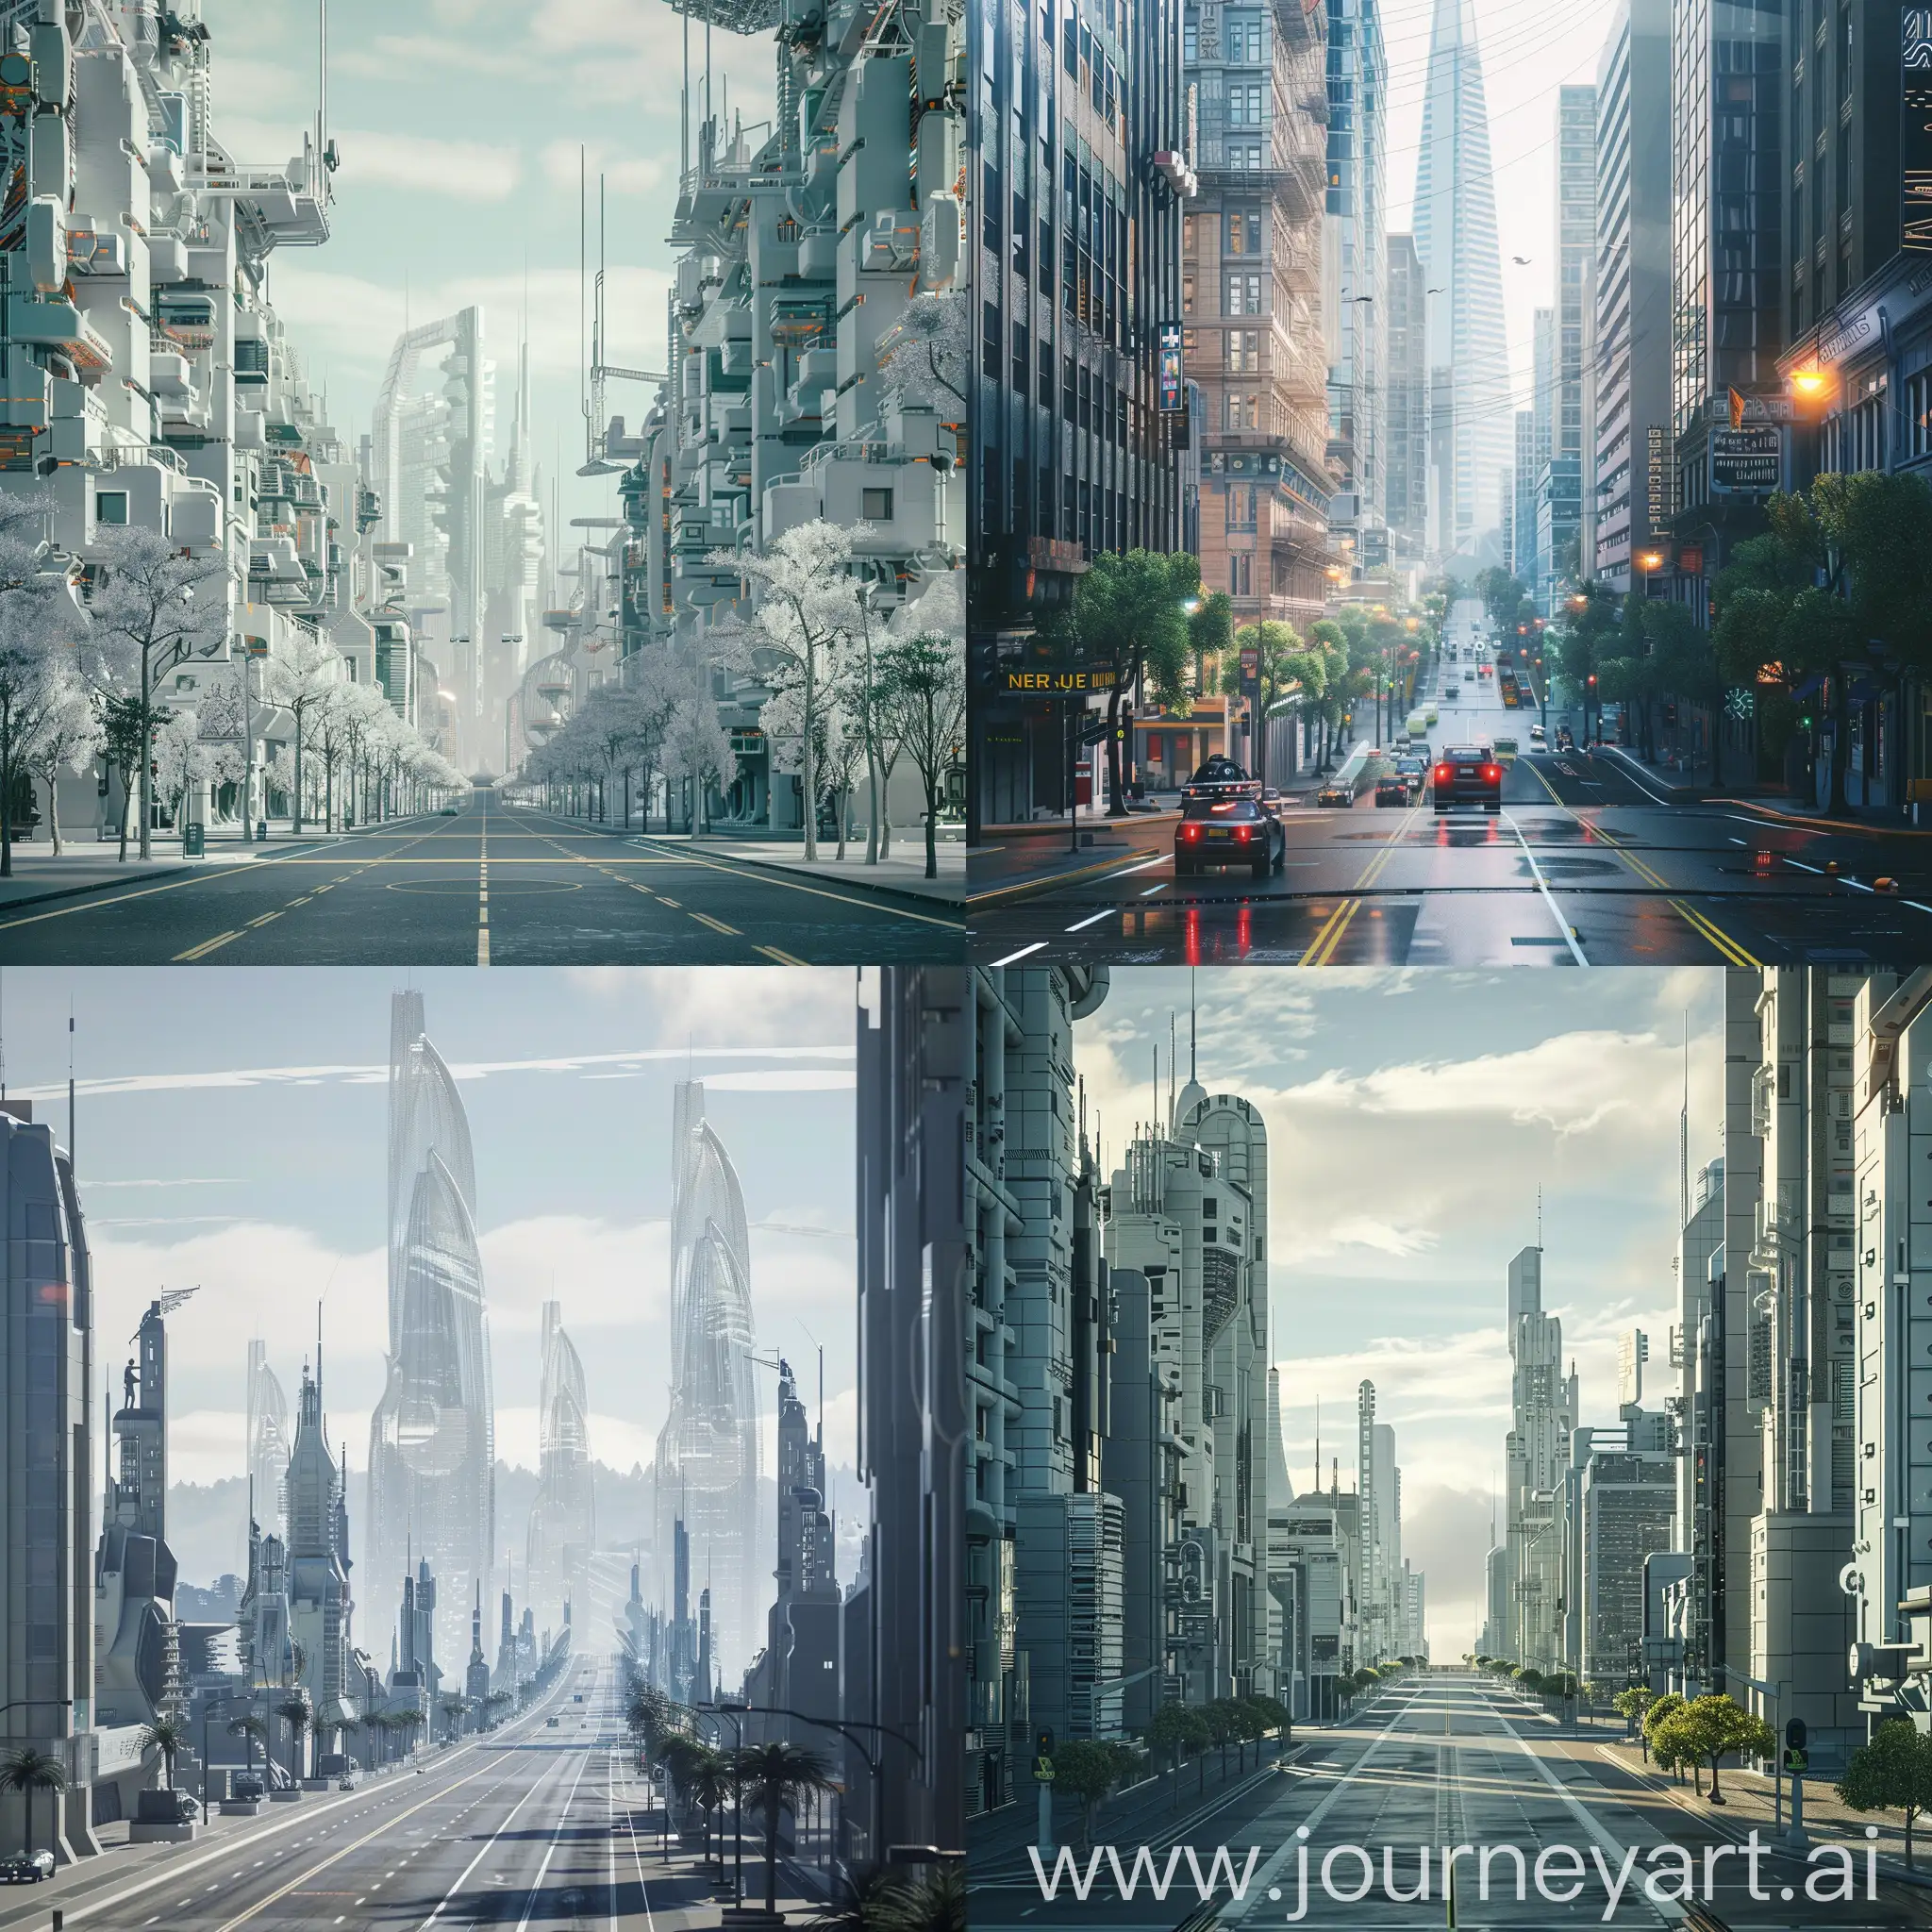 Surreal-HighTech-Futuristic-Cityscape-Spring-Morning-in-Alternate-History-Northern-California